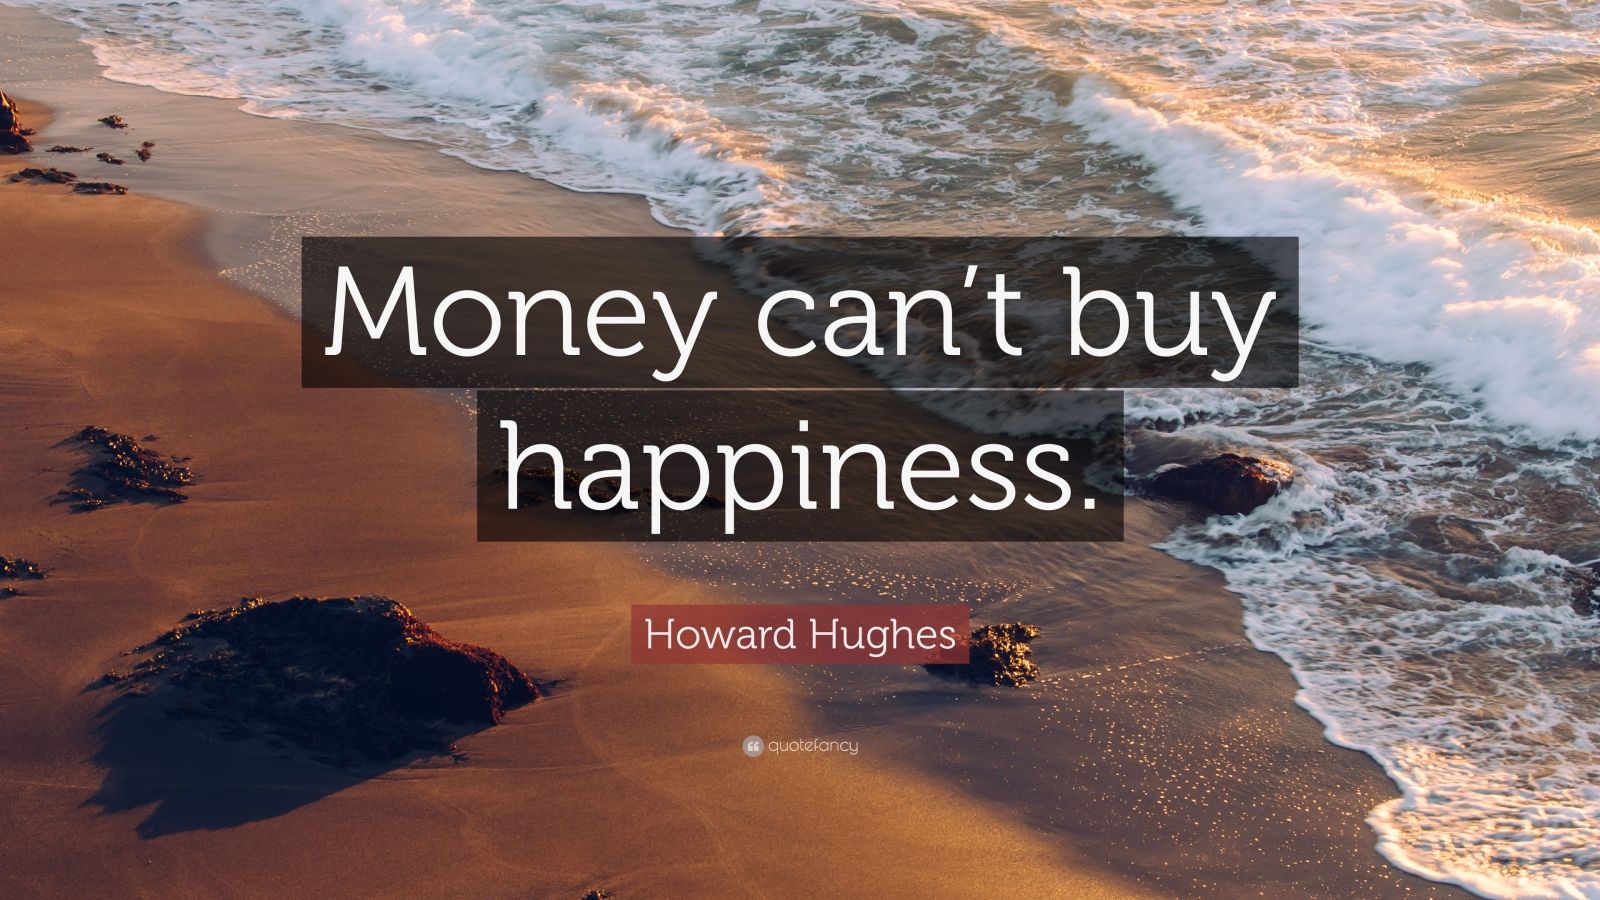 Howard Hughes Quote “Money can’t buy happiness.” (12 wallpapers